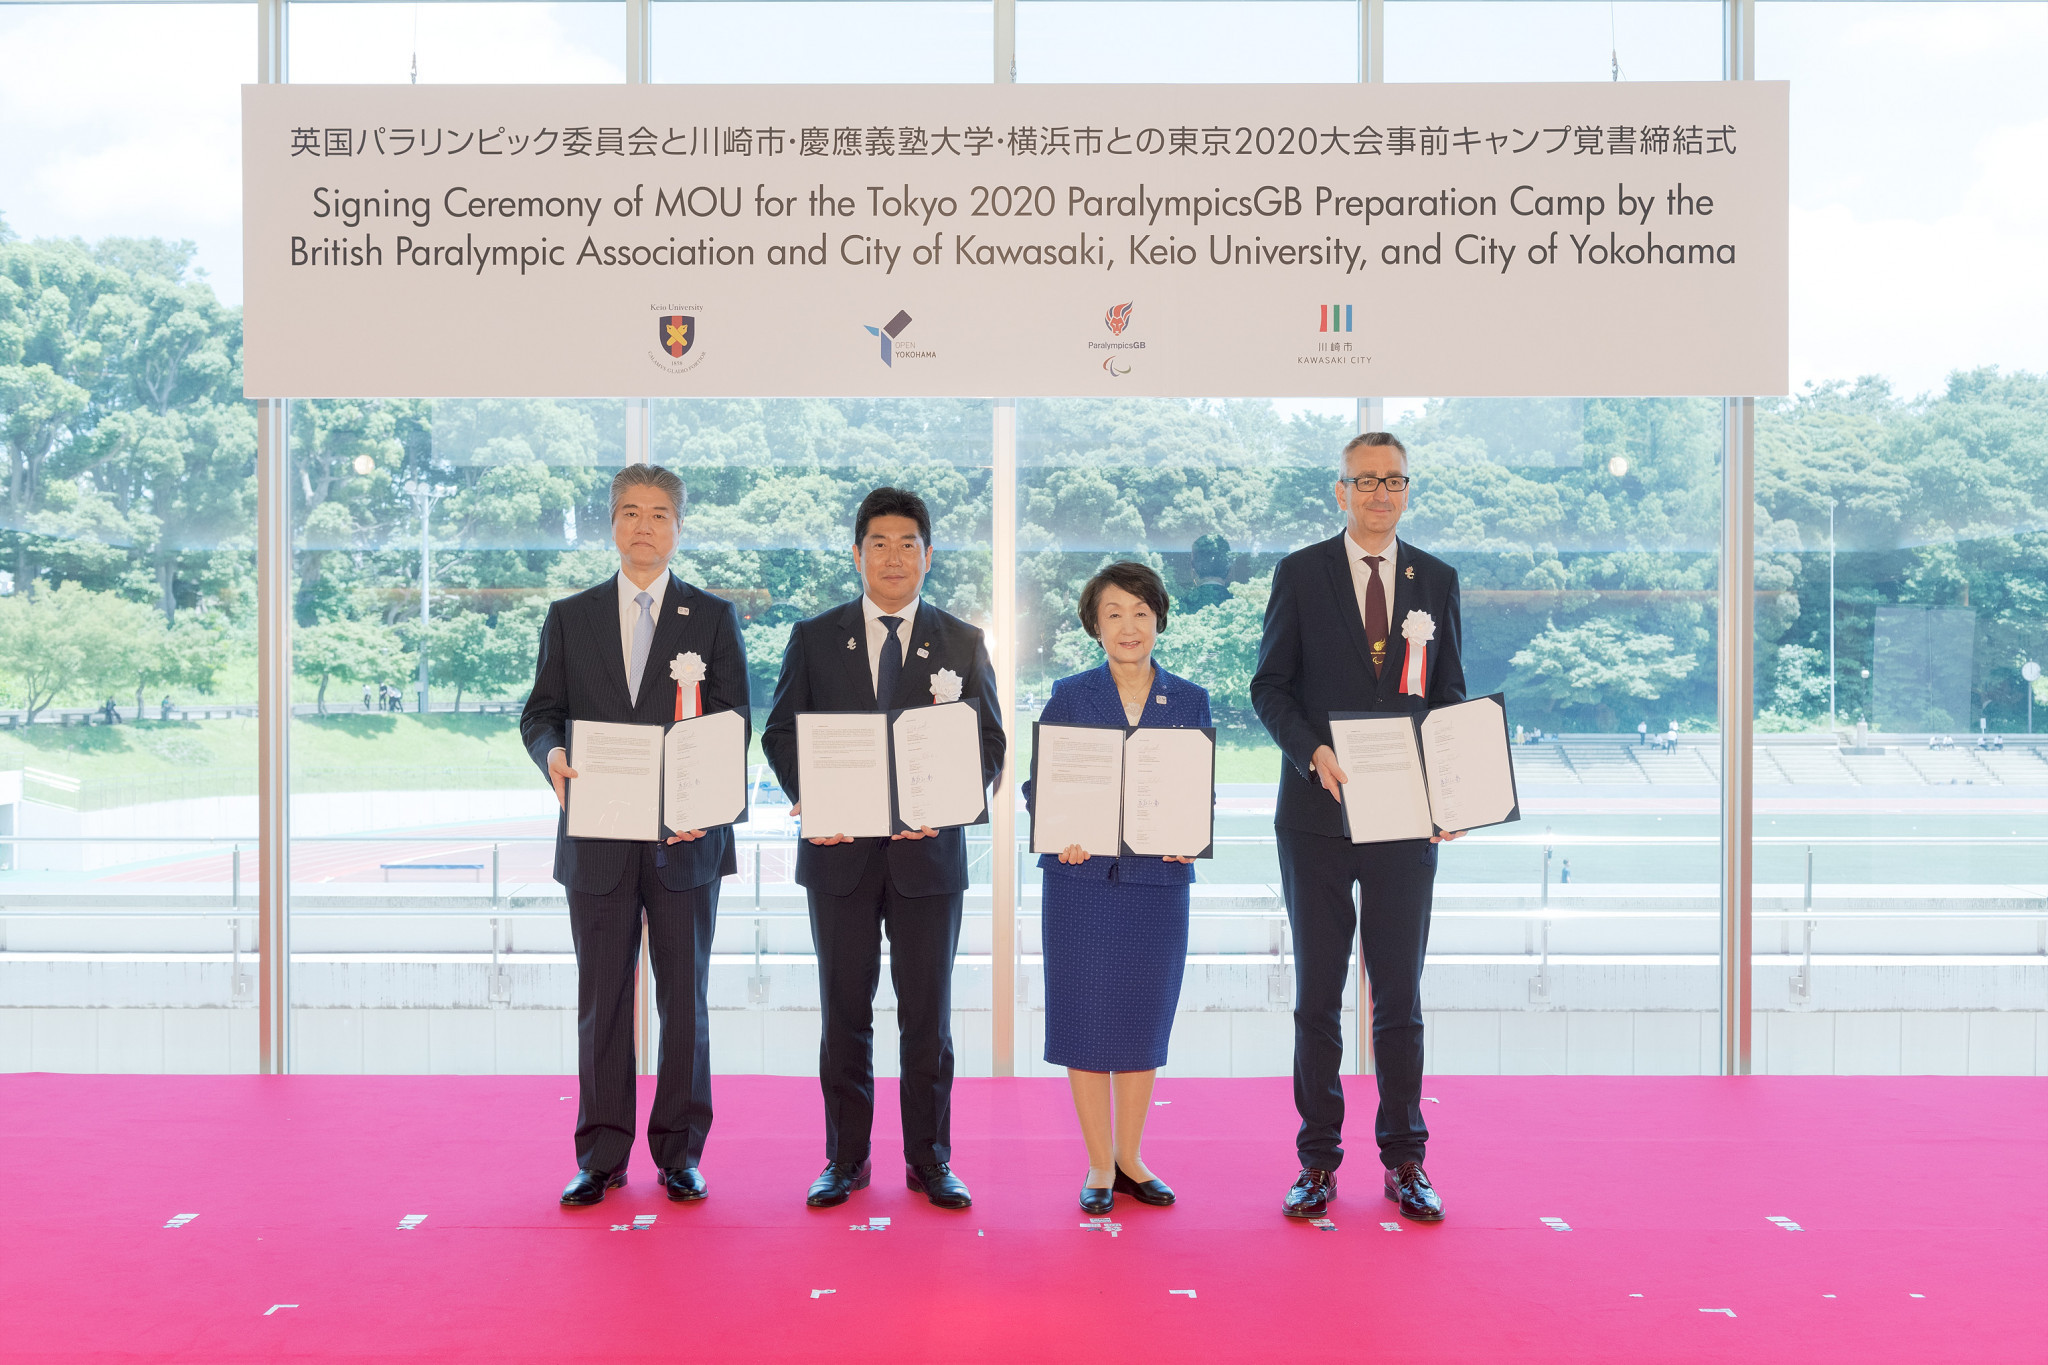 Keio University will serve as a preparation camp for British athletes competing at the Tokyo 2020 Paralympic Games ©BPA